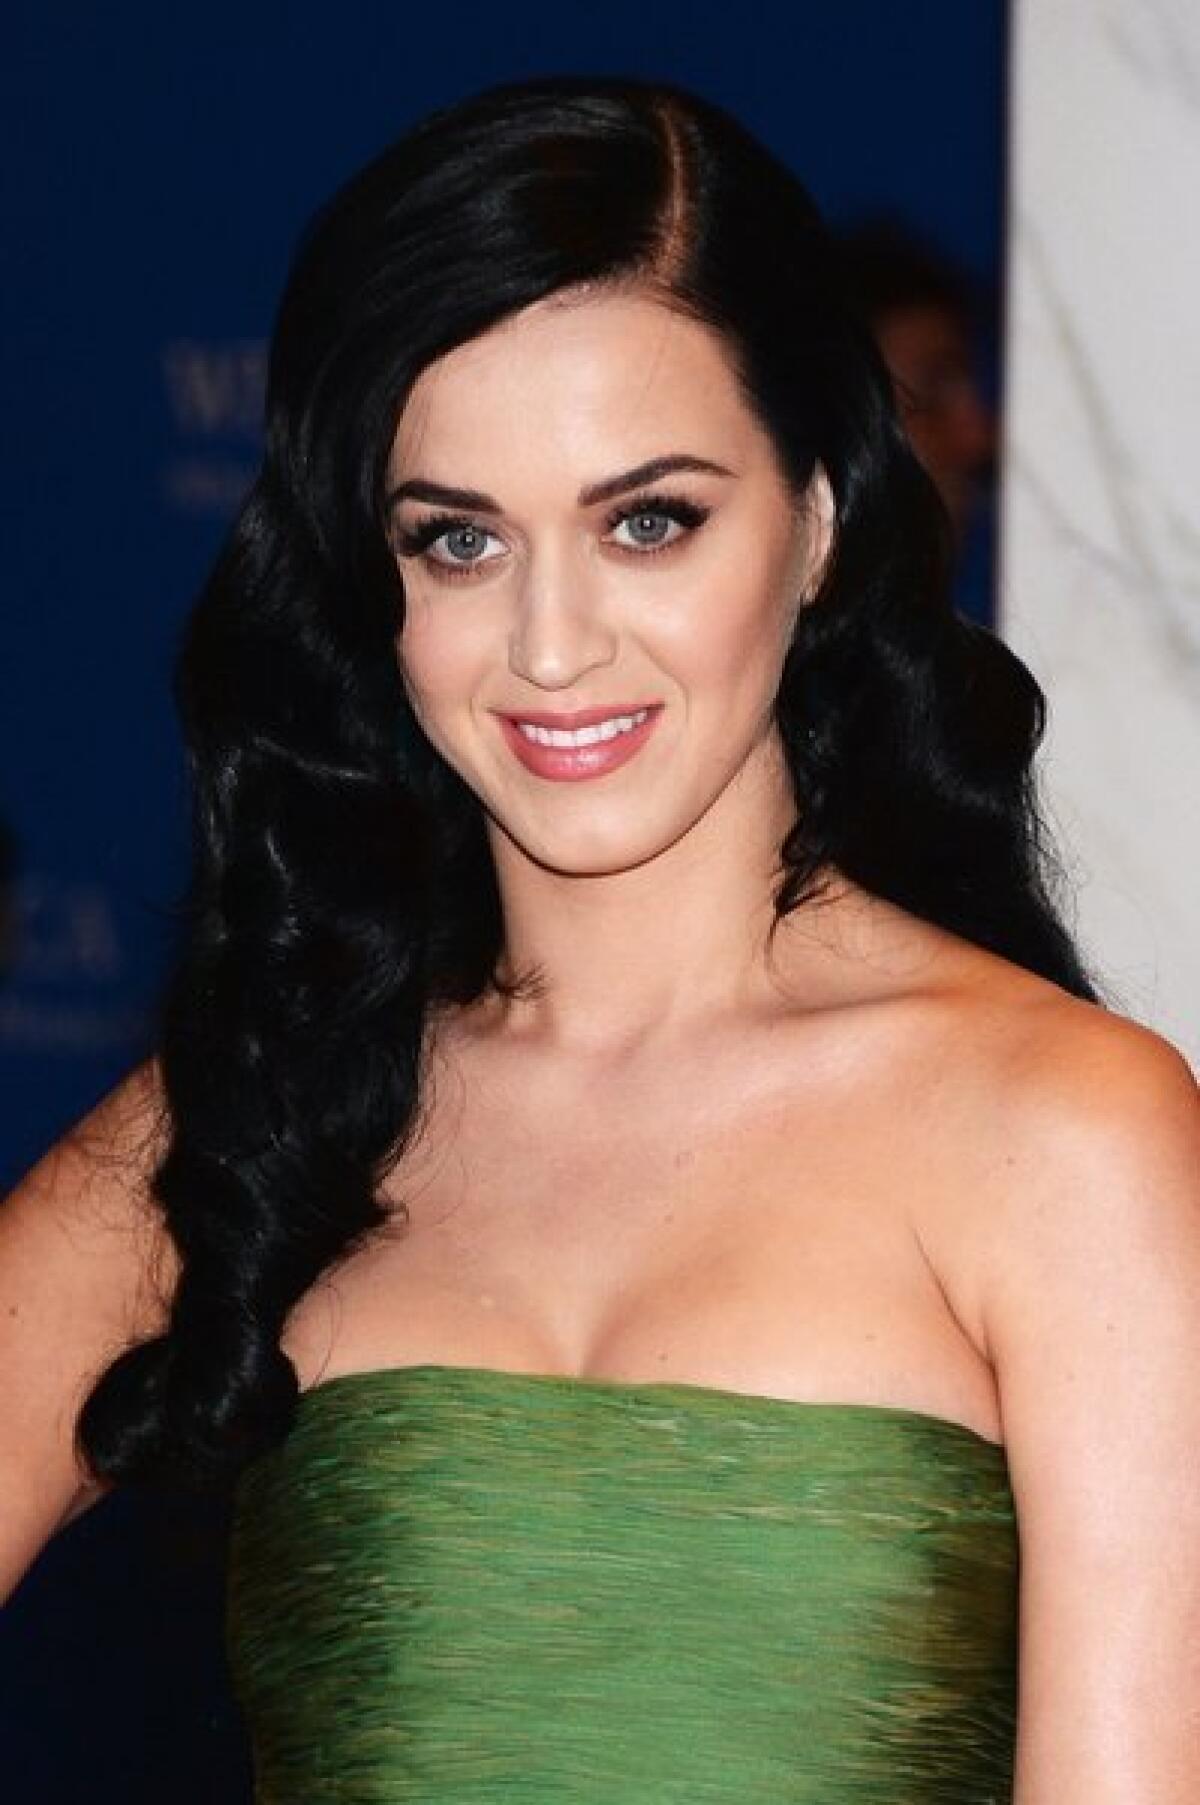 Singer Katy Perry attends the White House Correspondents' Association Dinner.